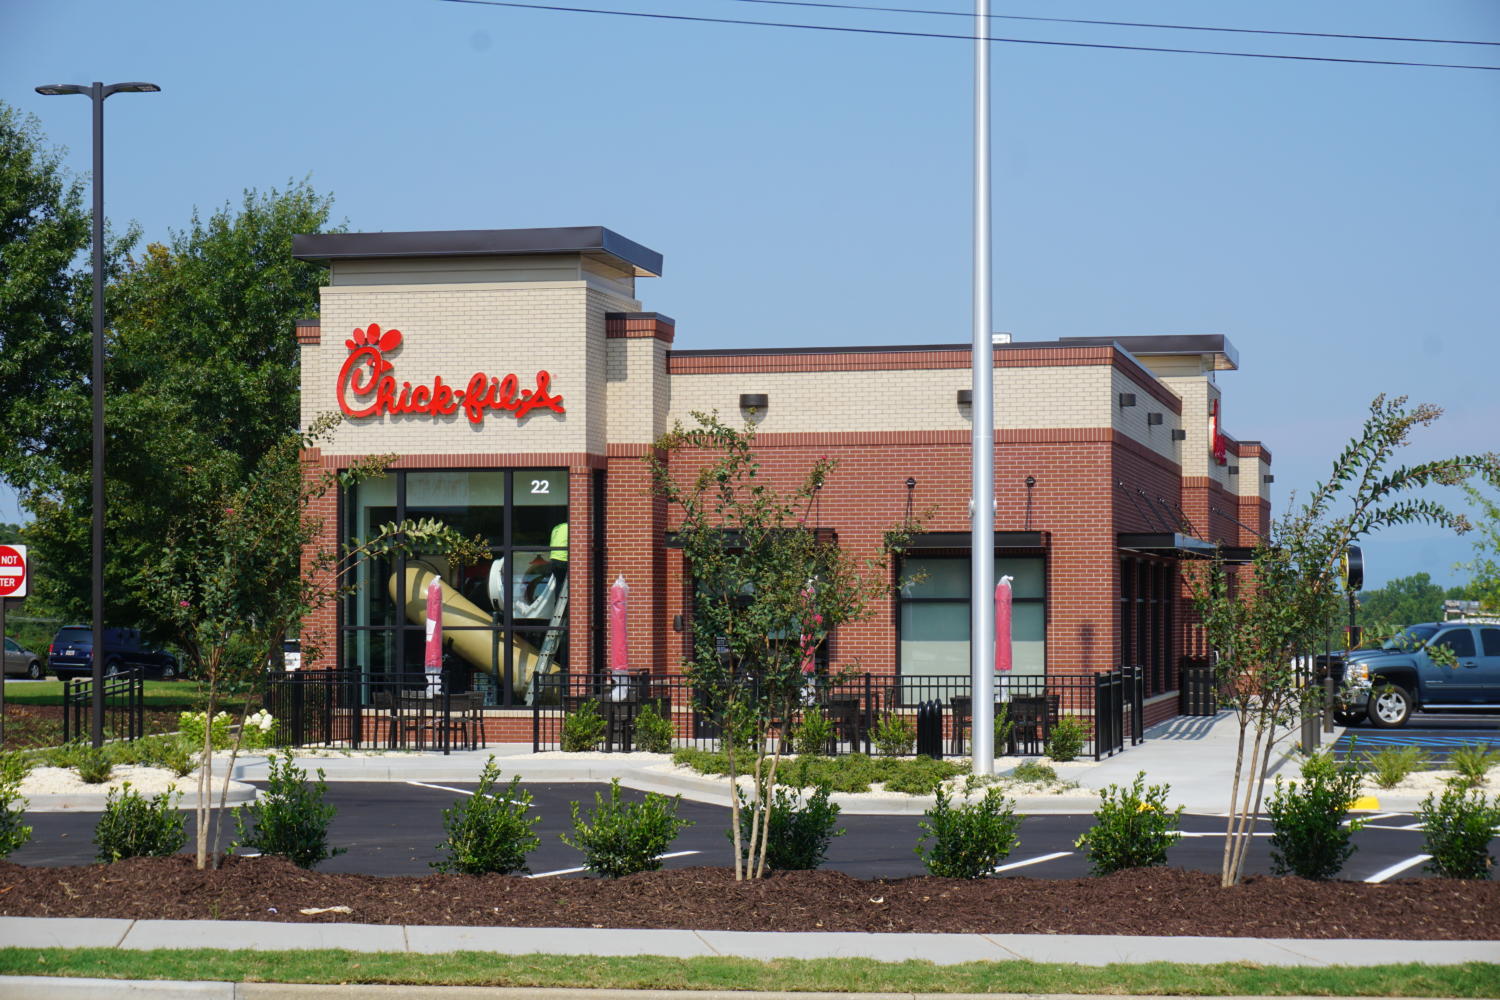 New+Chick-Fil-A+building+in+TR